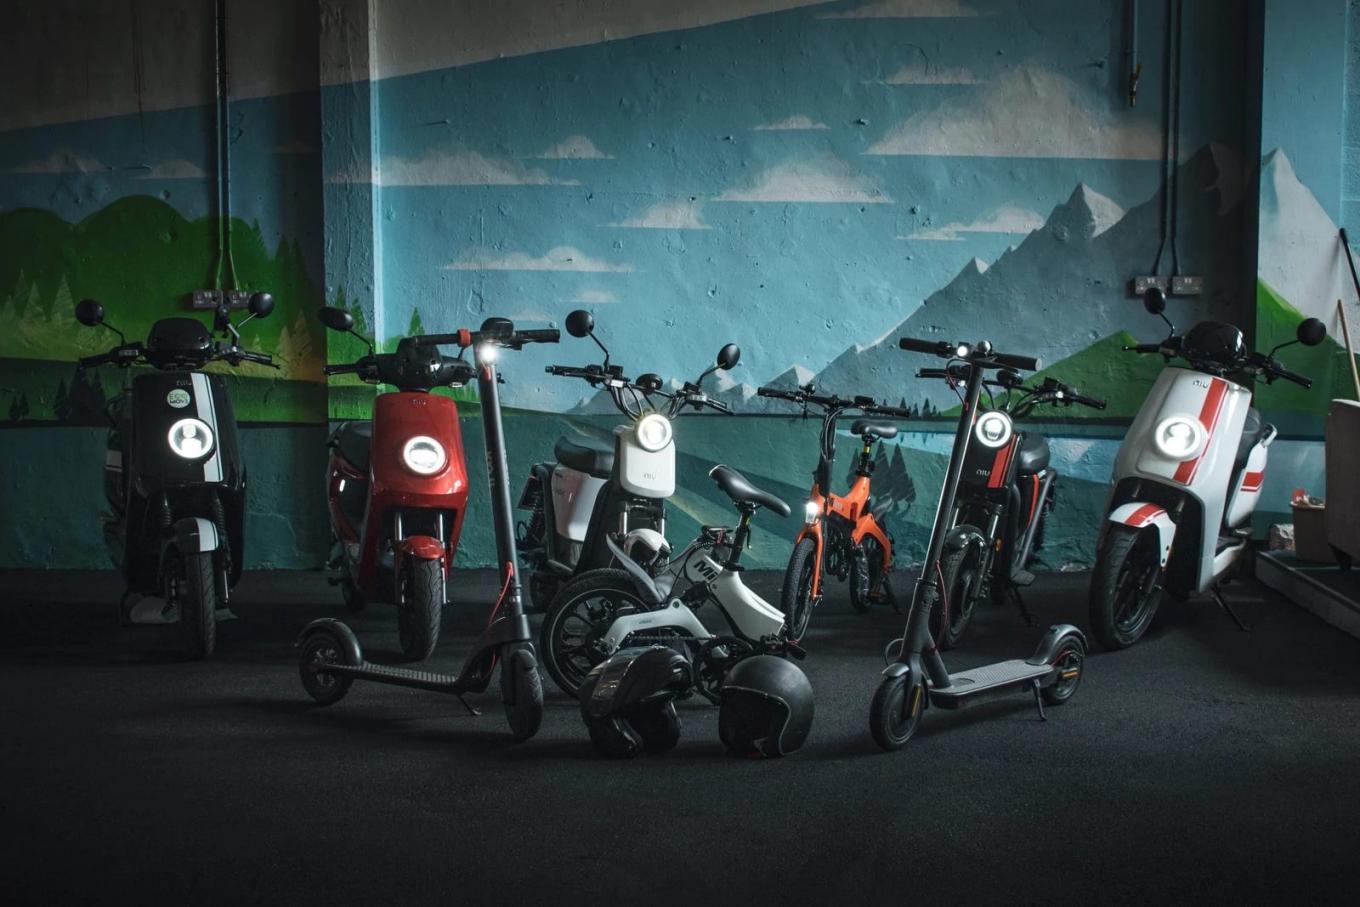 Electric scooters and bikes lined up